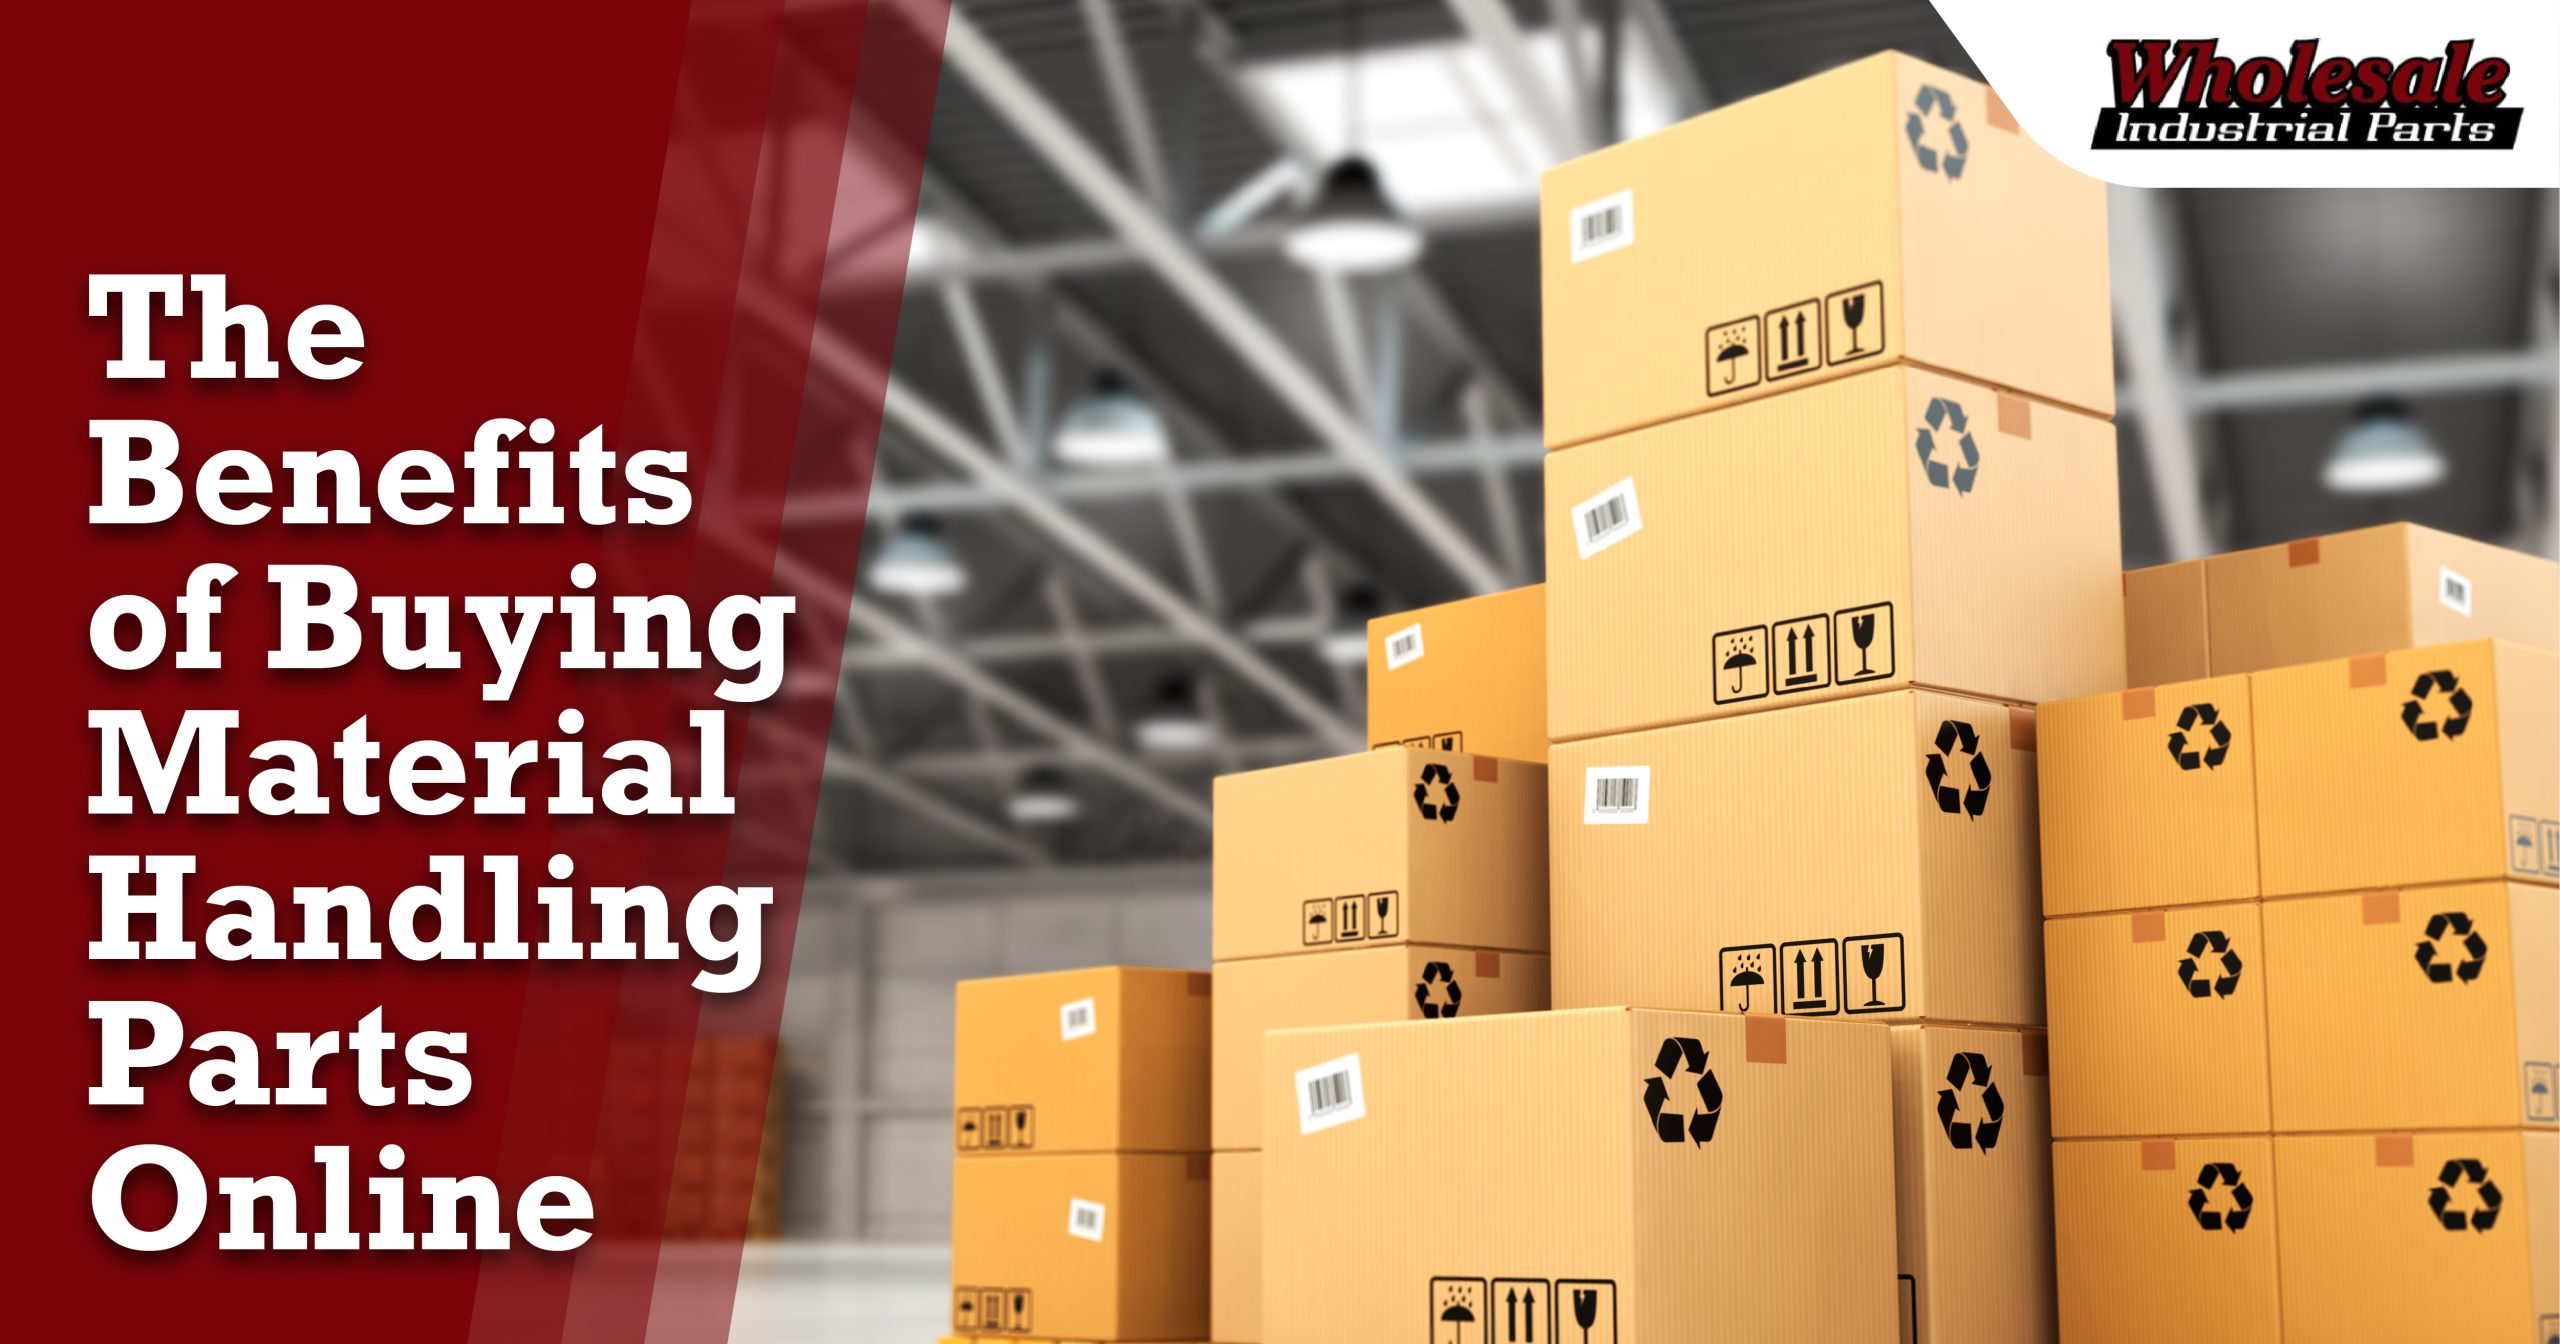 The Benefits of Buying Material Handling Parts Online